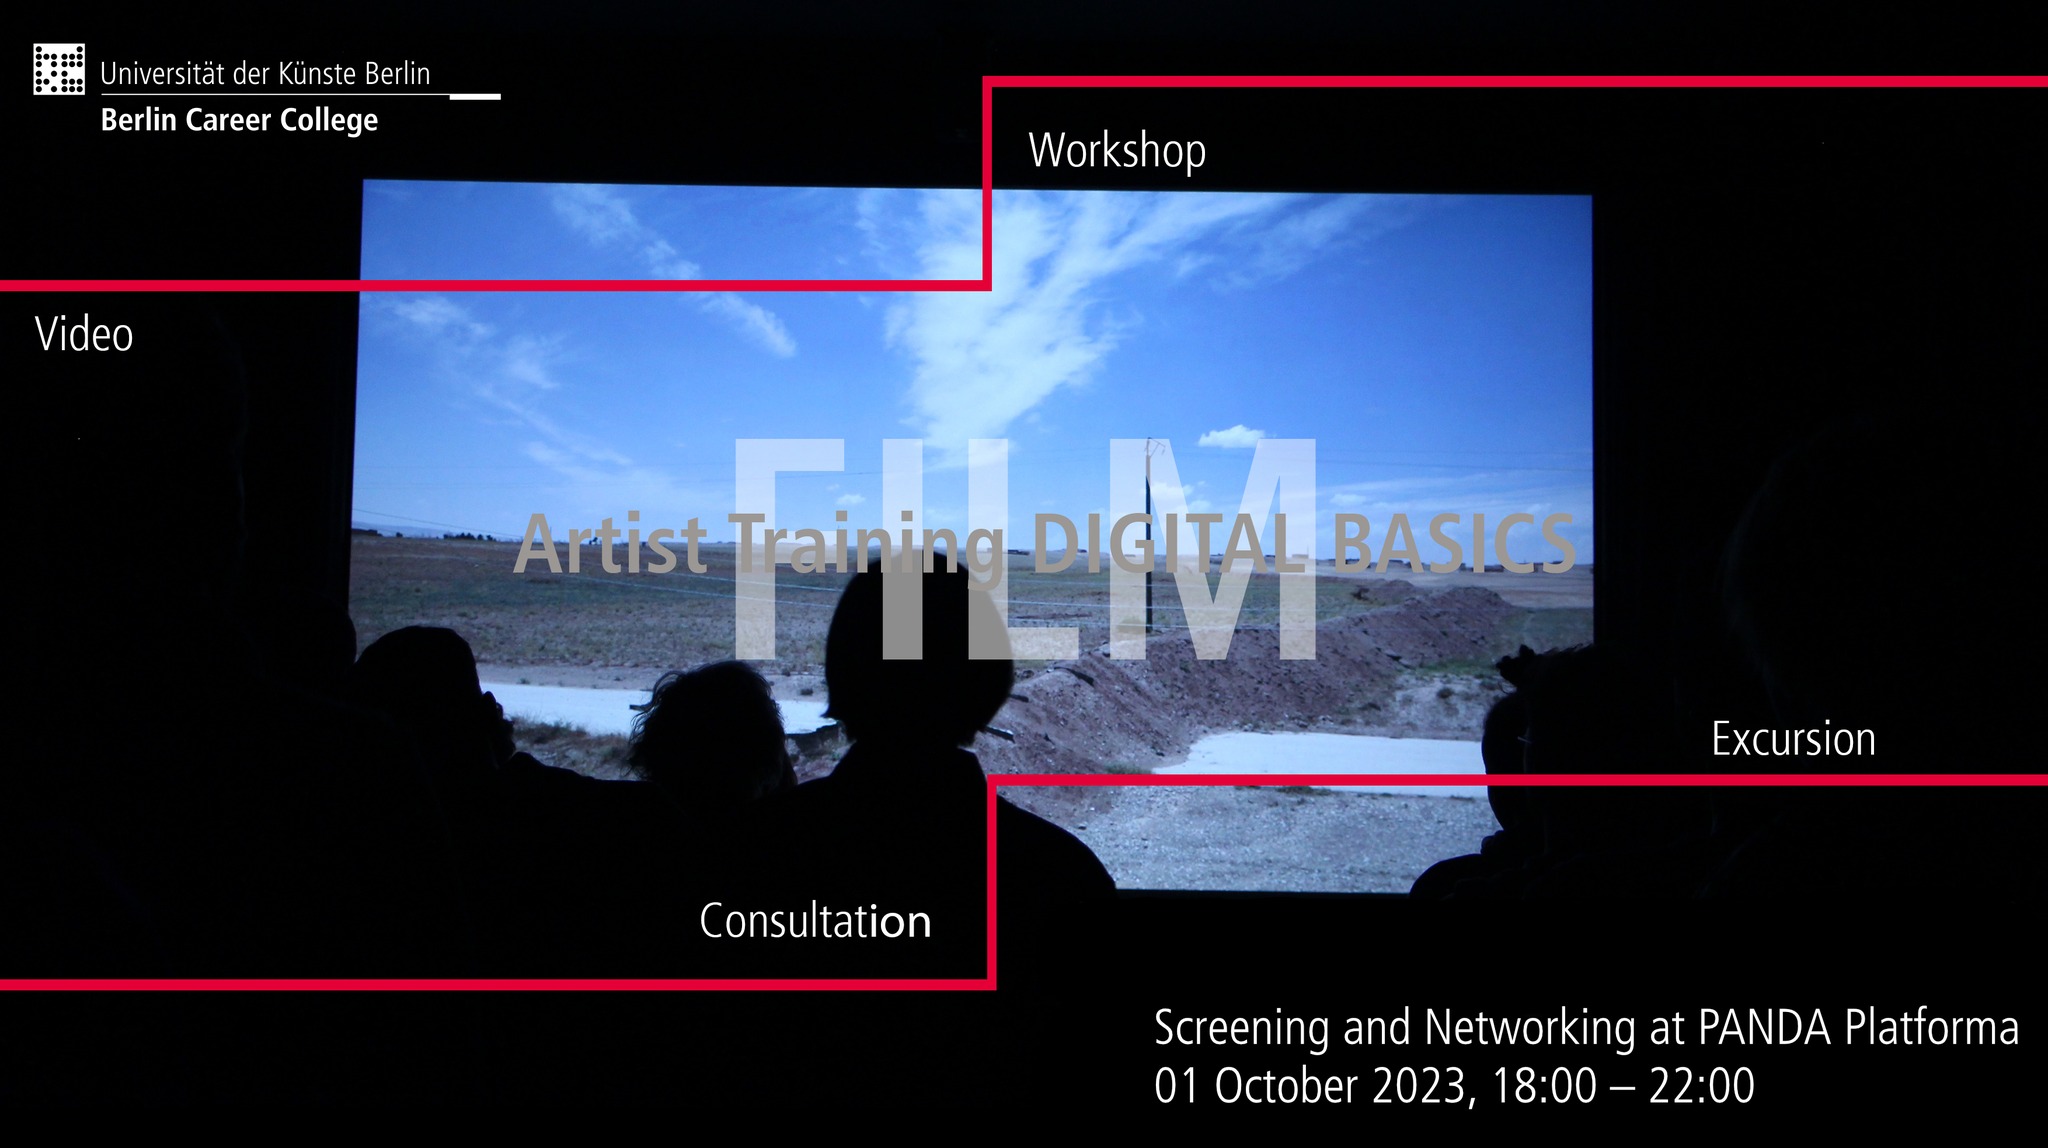 The DAAD project Artist Training DIGITAL BASICS: Screening and Networking - 01/10, 18:00